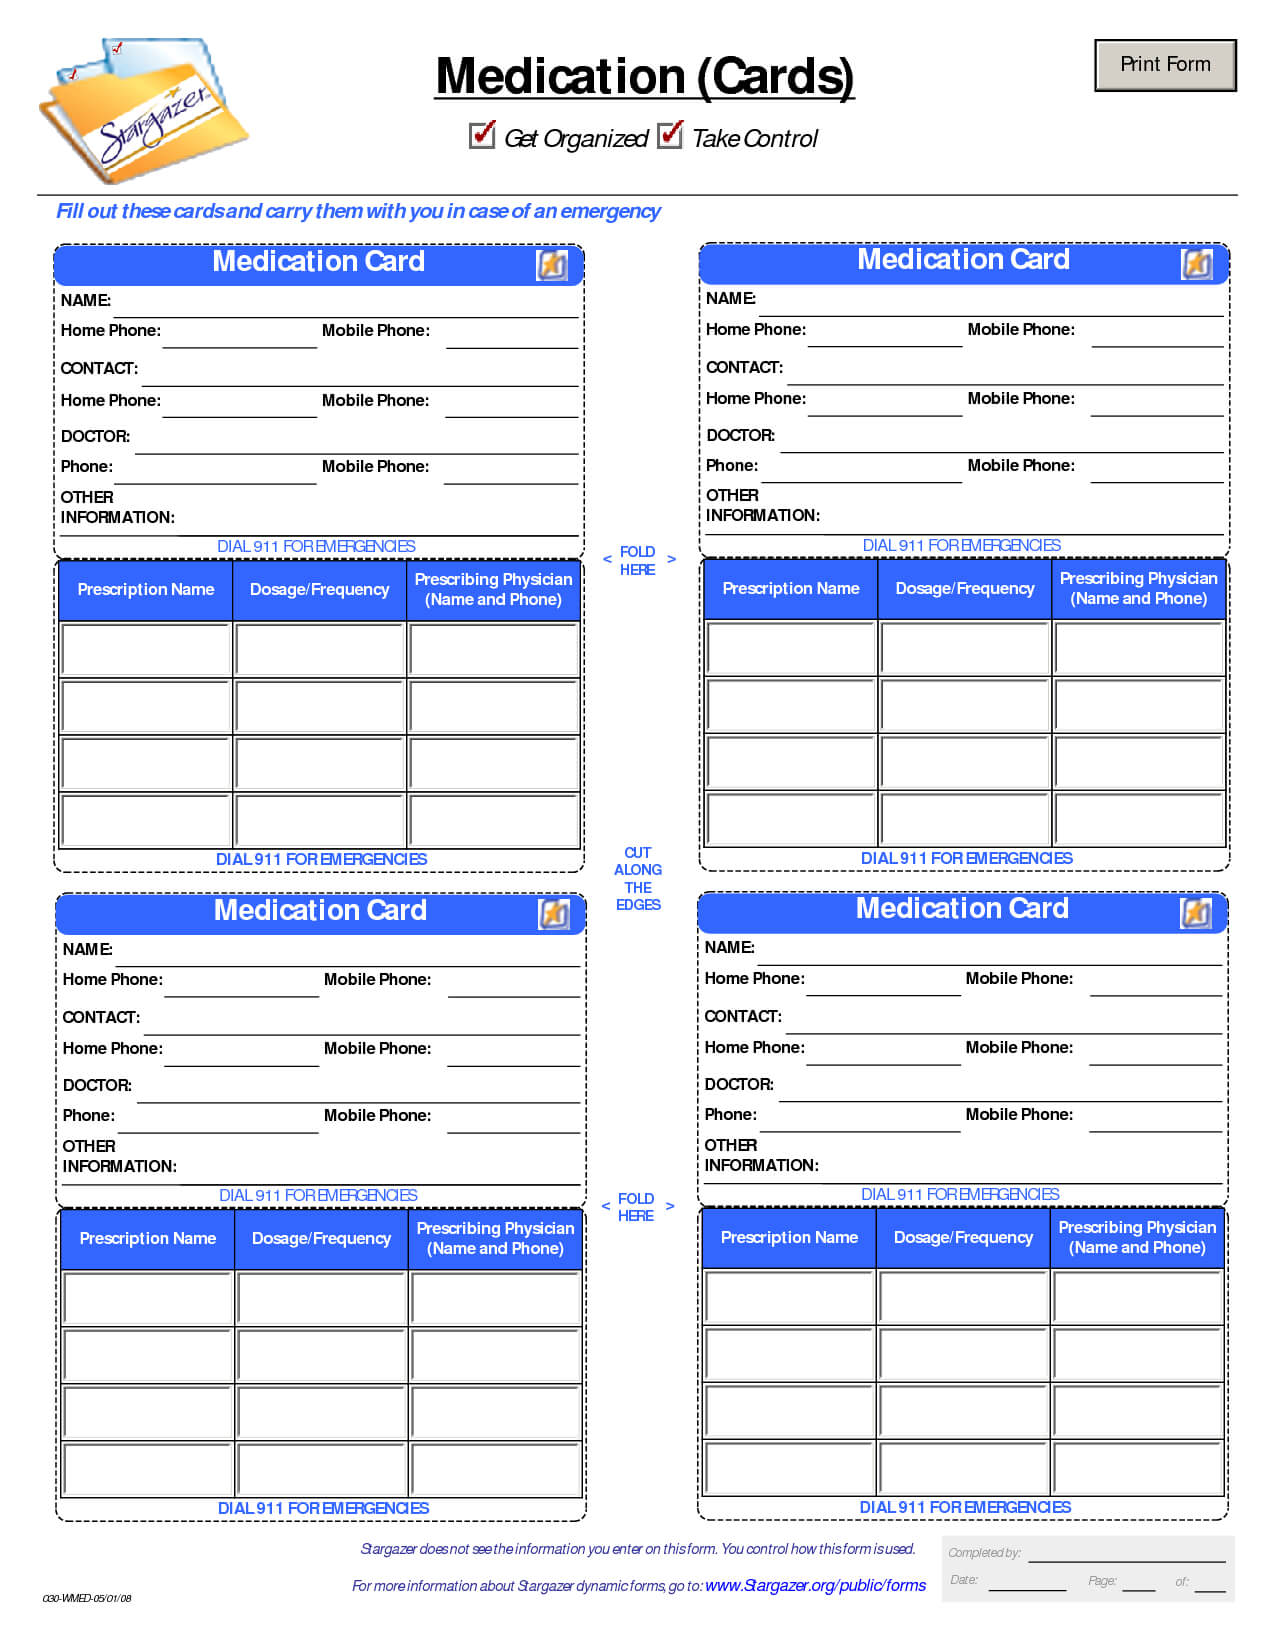 Patient Medication Card Template | Emergency Kits With Regard To Med Card Template